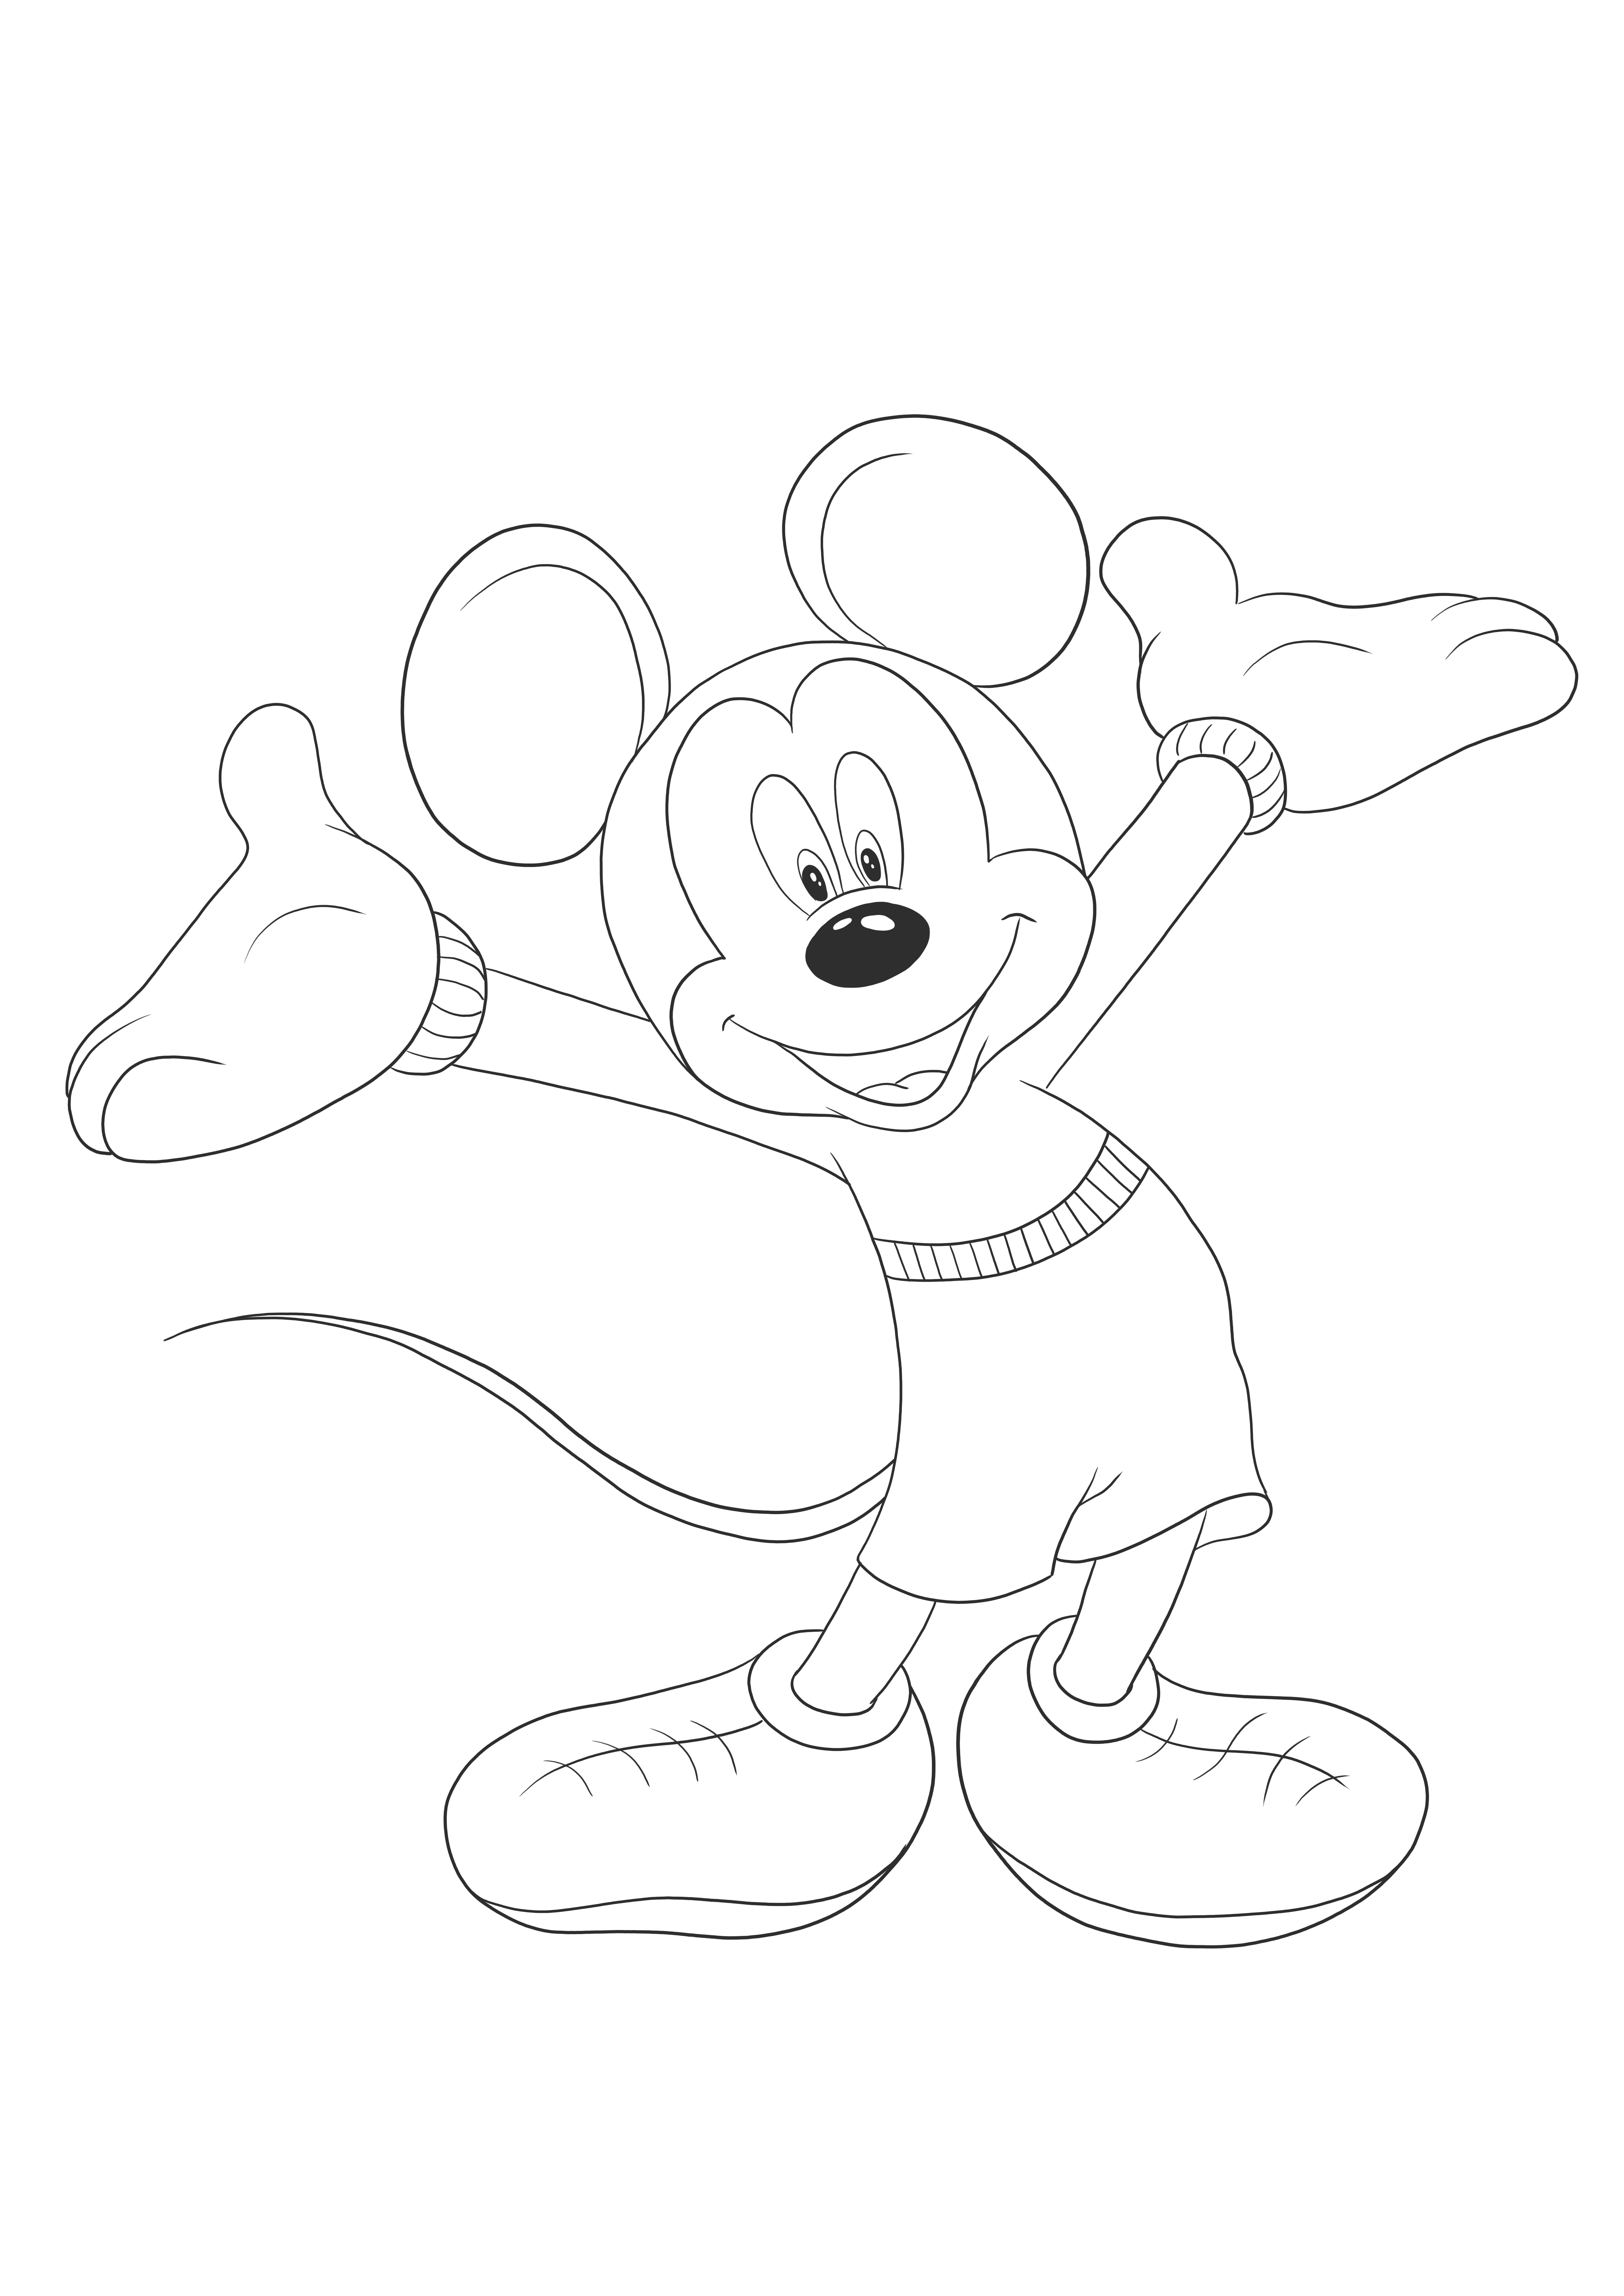 Happy Mikey Mouse waiting to be colored-free printable